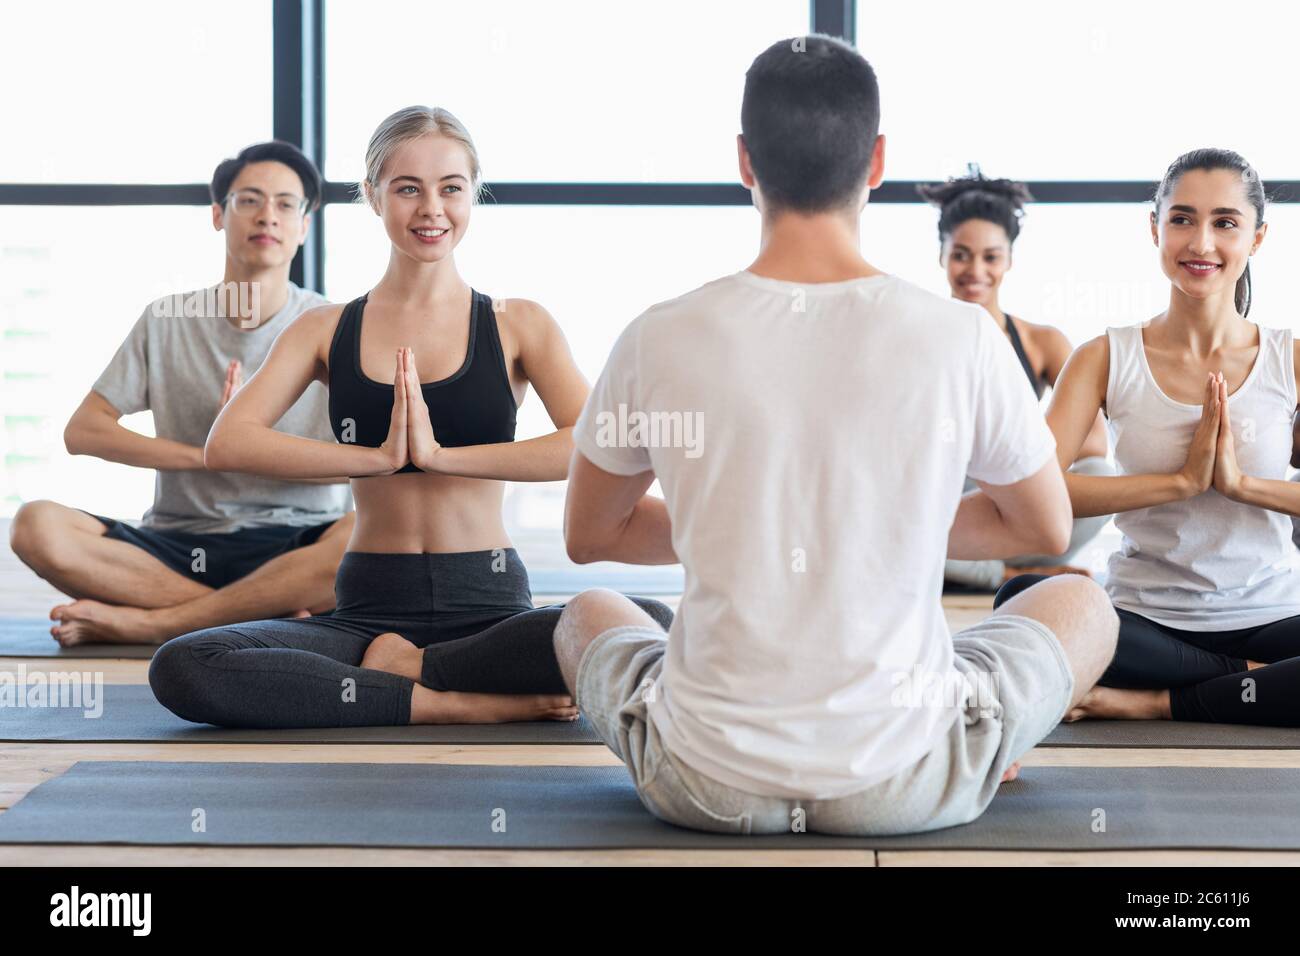 Yoga With Instructor. Group Of Young People Practicing Meditation Exercises With Trainer Stock Photo